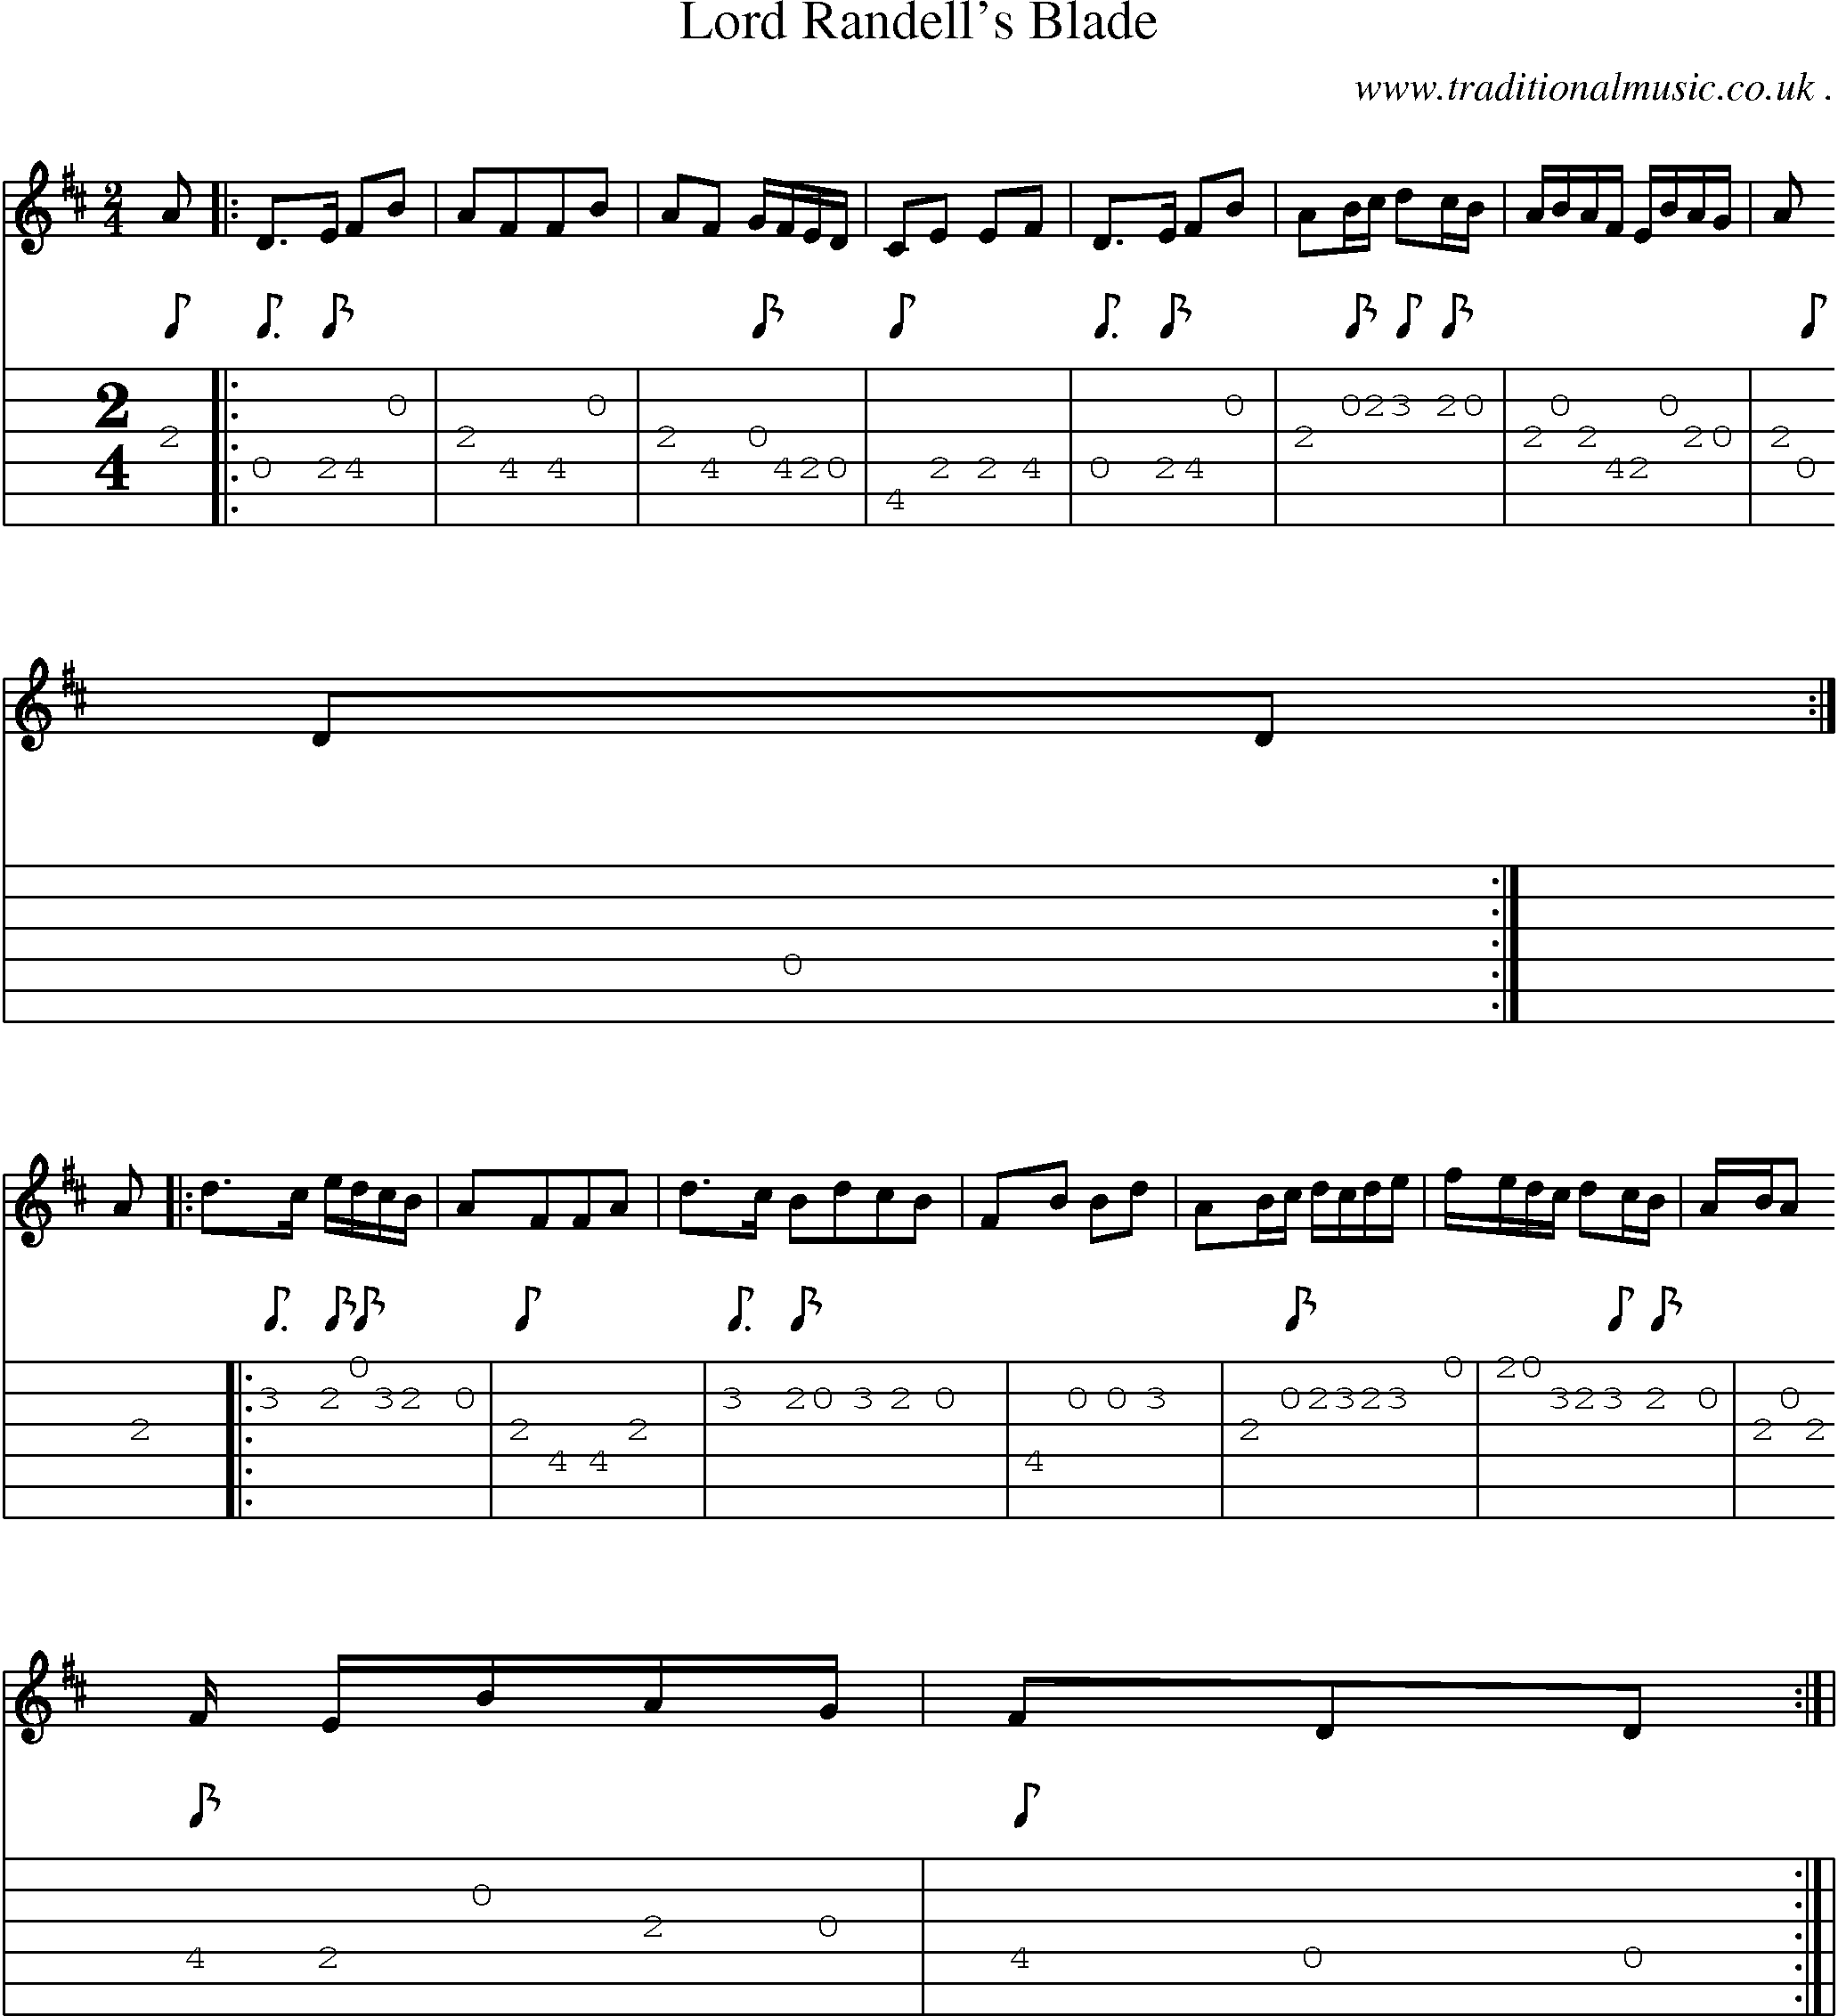 Sheet-music  score, Chords and Guitar Tabs for Lord Randells Blade